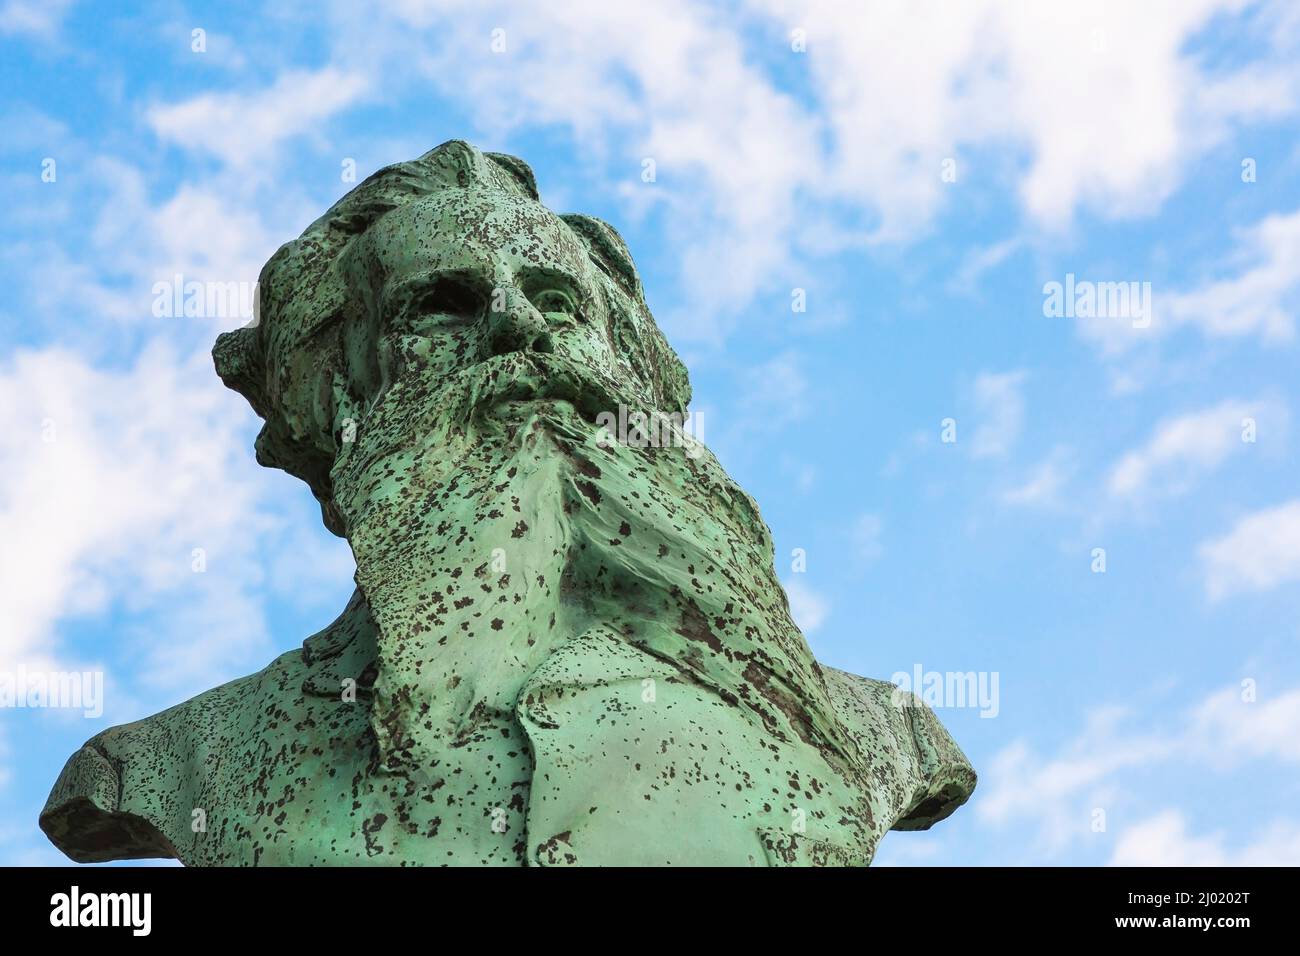 Bronze bust sculpture of unknown historic figure. Stock Photo